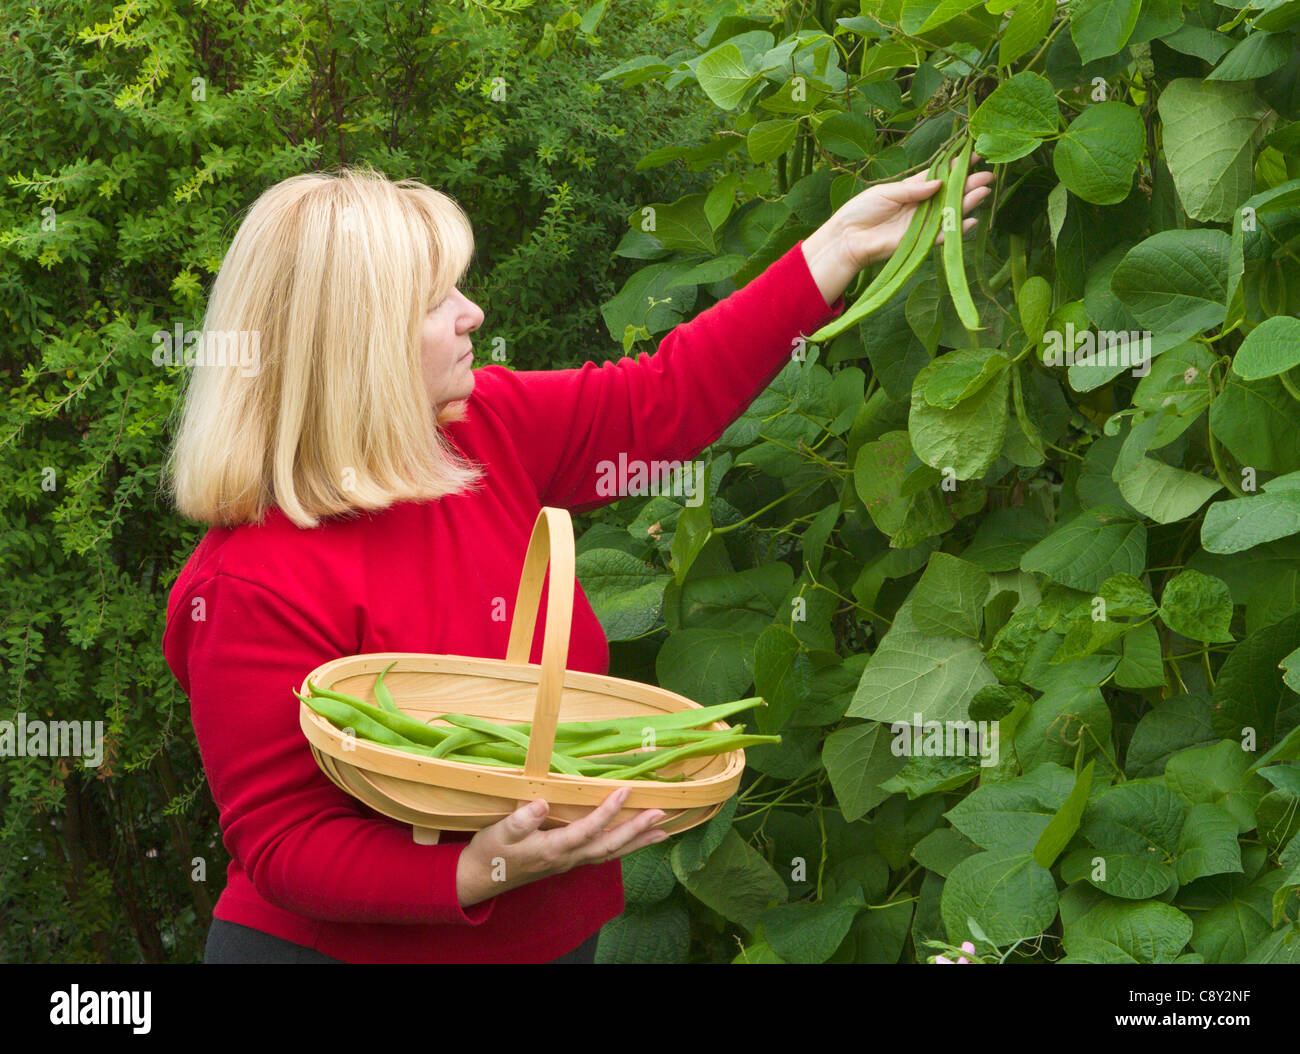 Woman collecting runner beans, MR Stock Photo